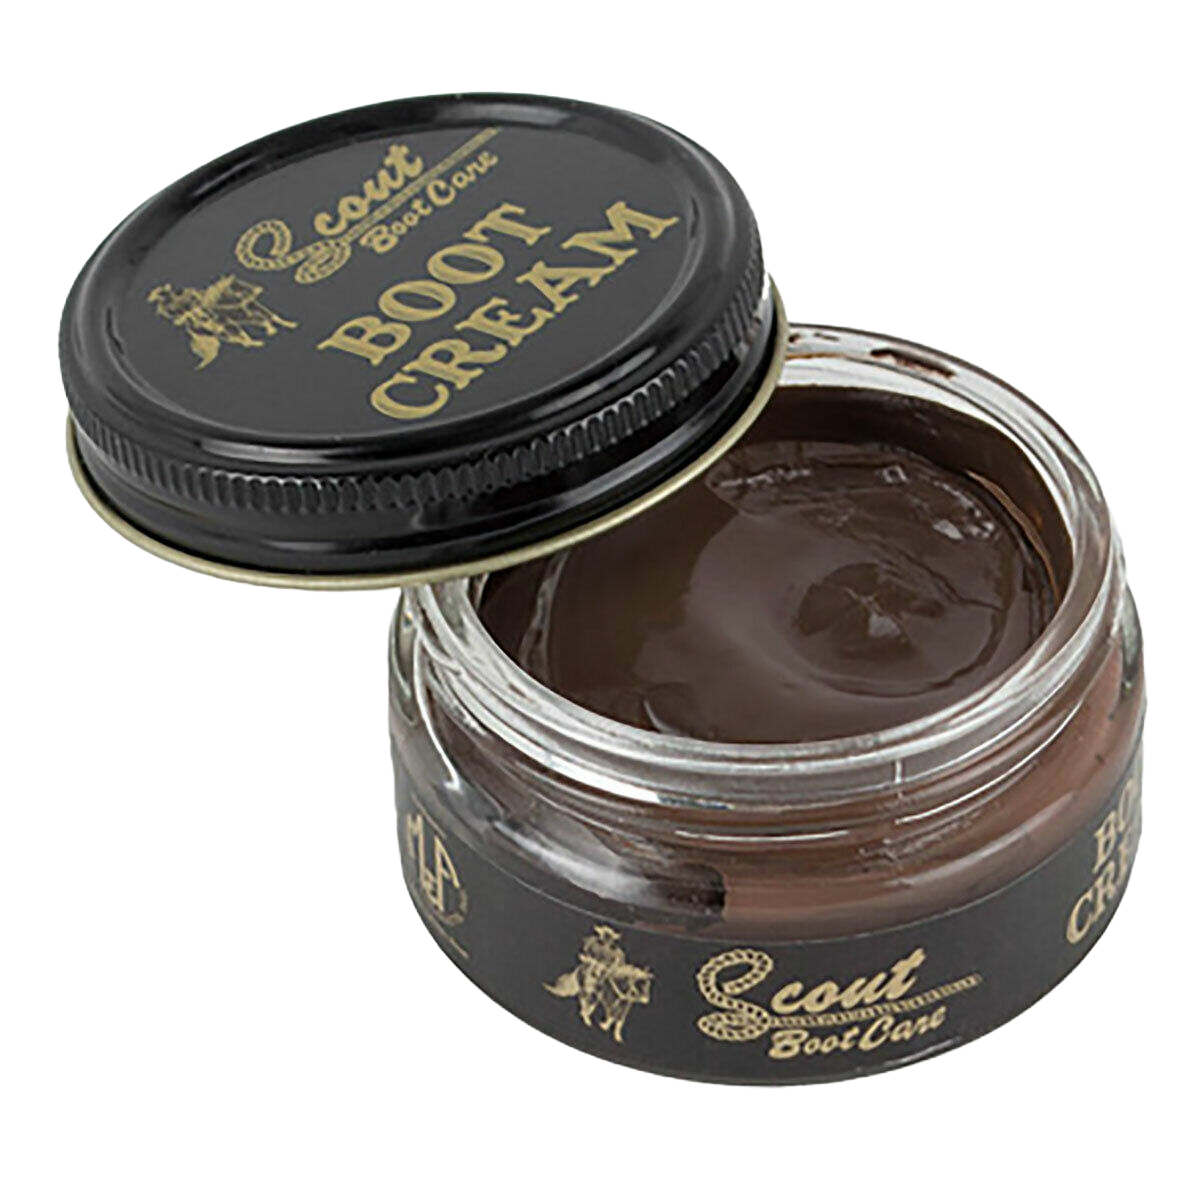 Scout Brown Leather Boot Cream Polish 1.55oz 0350102